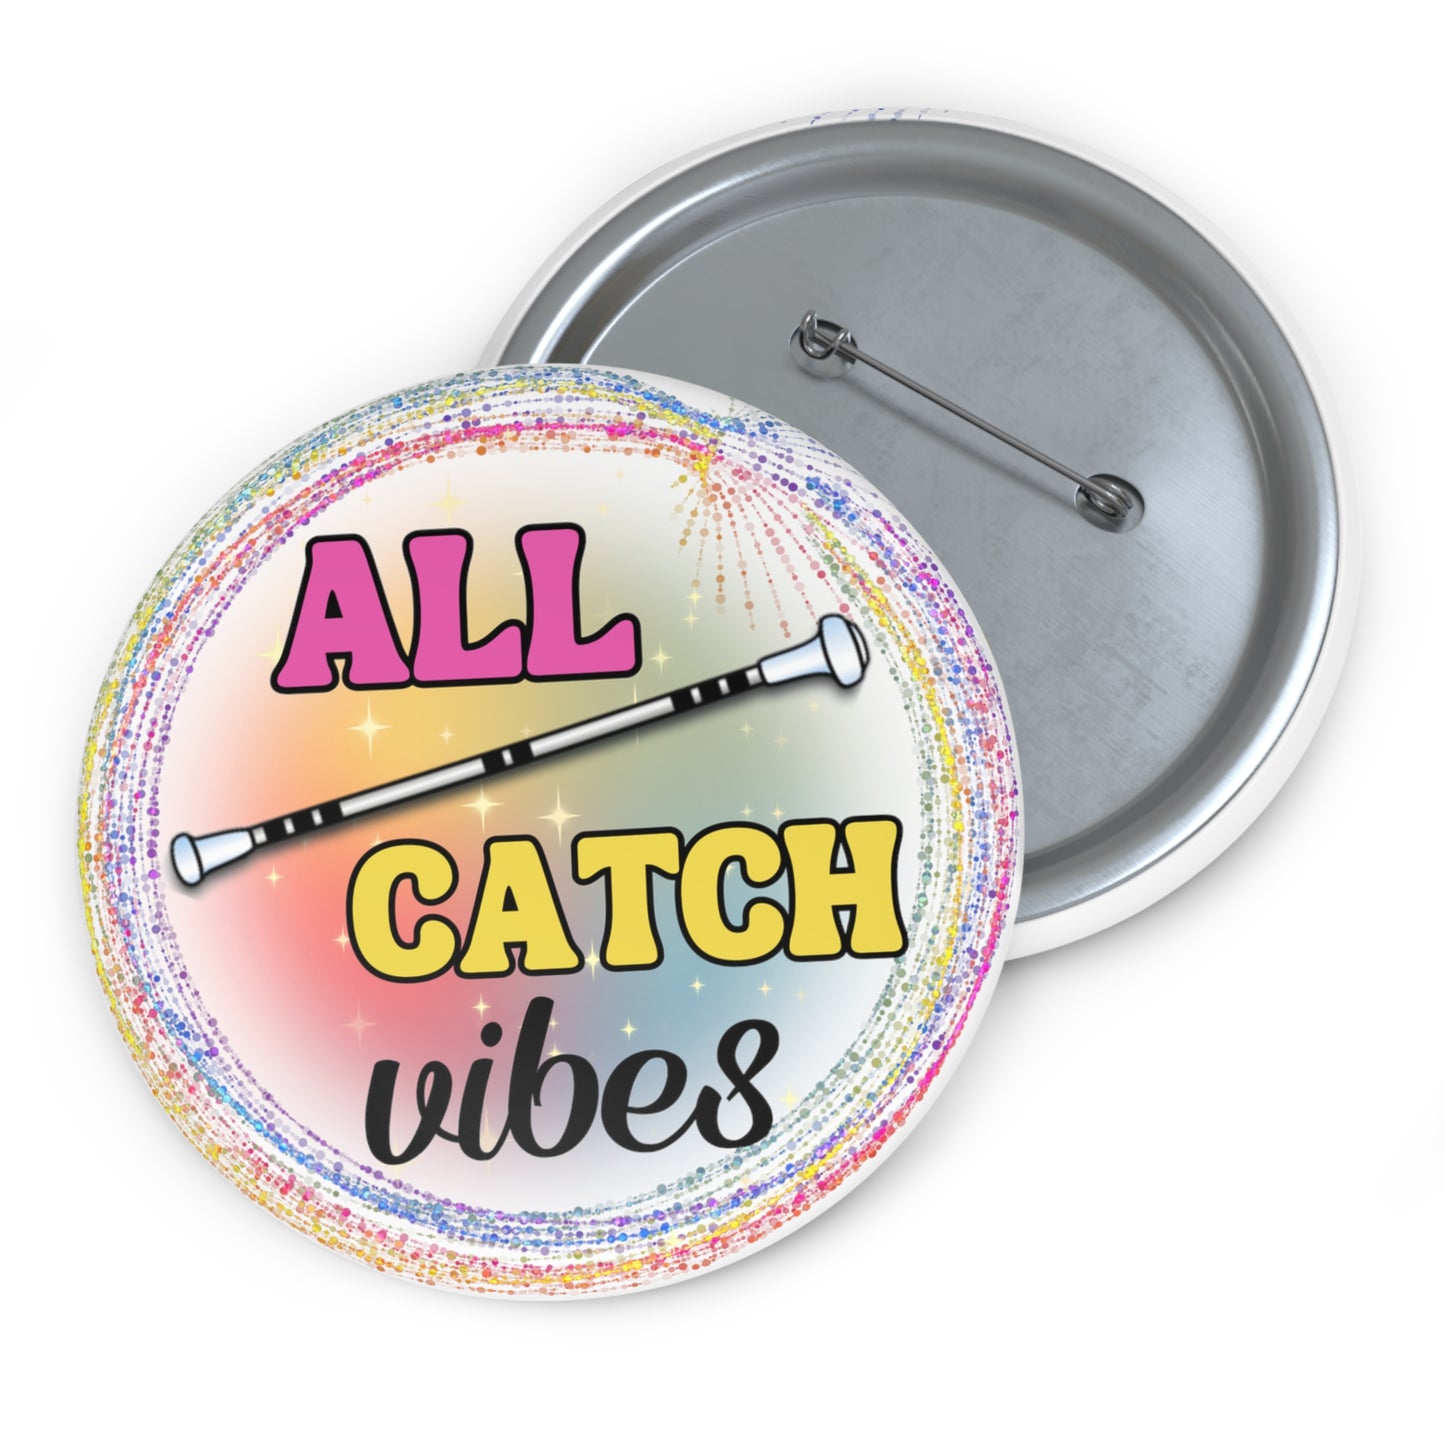 All Catch Vibes Baton Twirling Pinback Button, Competiton Gift for Baton Twirler, Recital Gift for Twirler Daughter